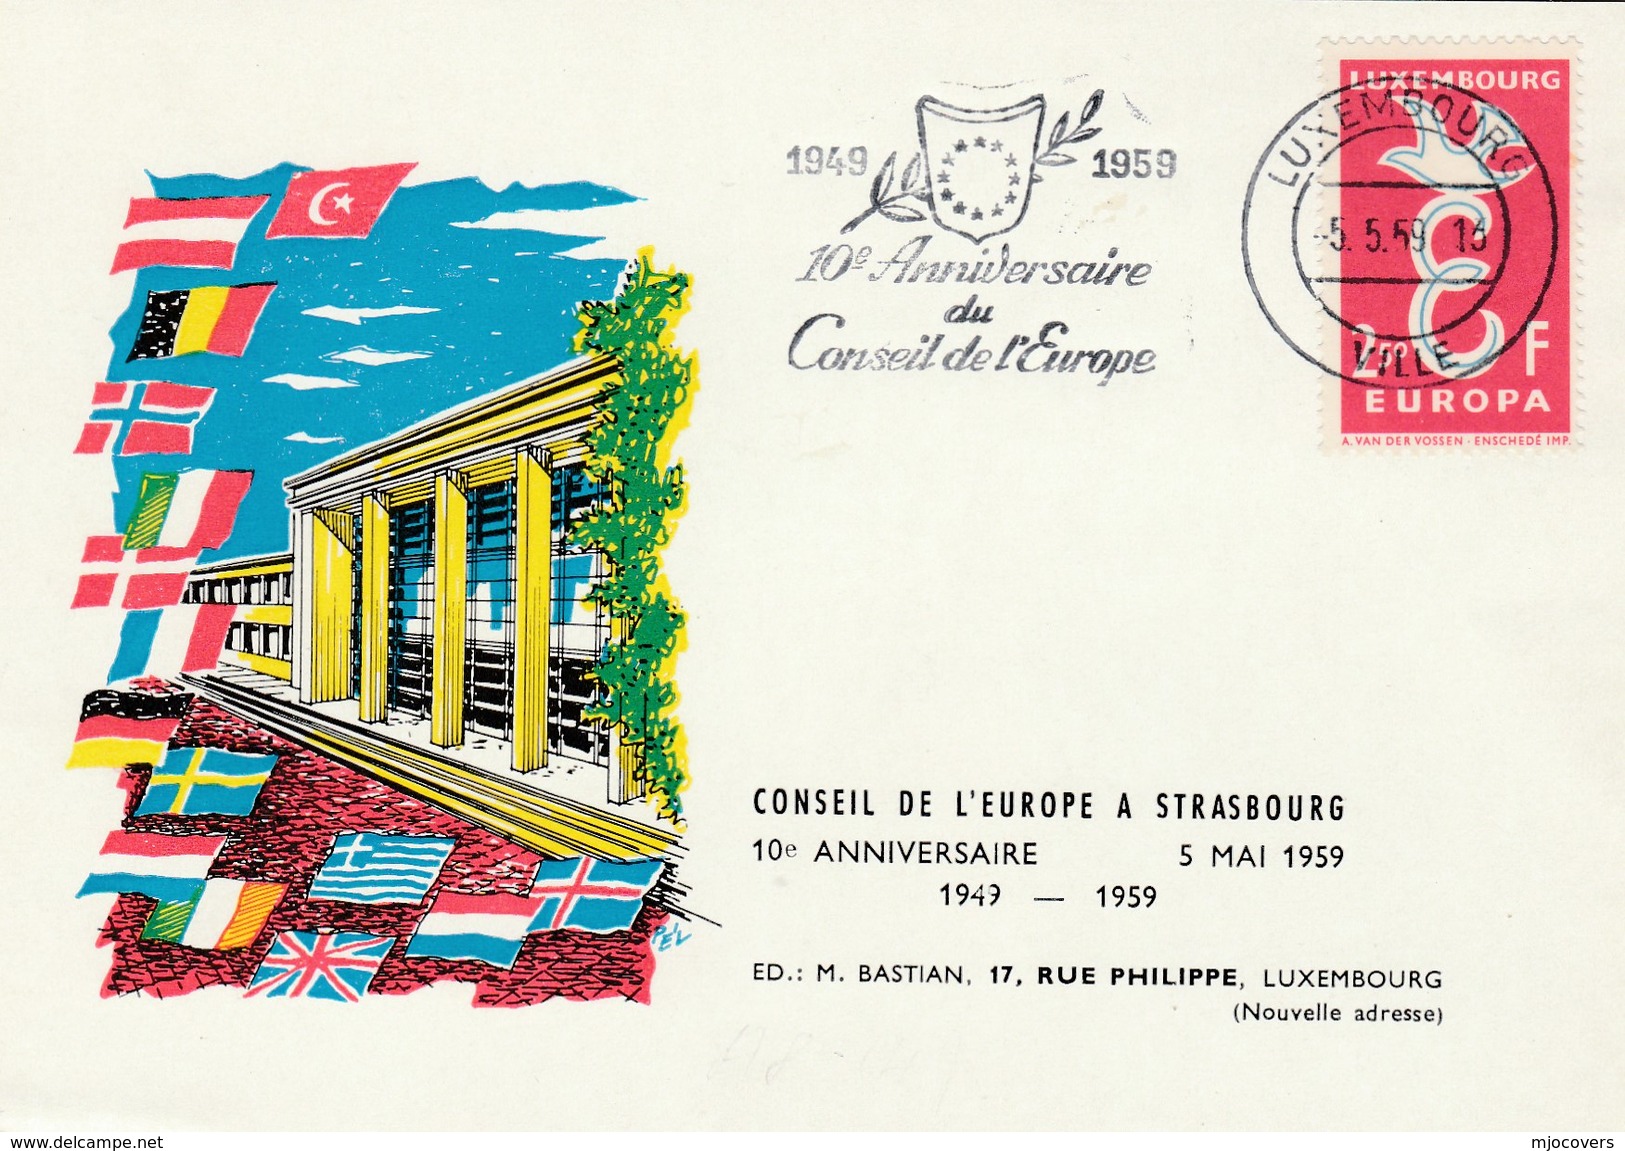 1969 Luxembourg COUNCIL OF EUROPE 10th ANNIV EVENT COVER Card Stamps Europa European - Briefe U. Dokumente